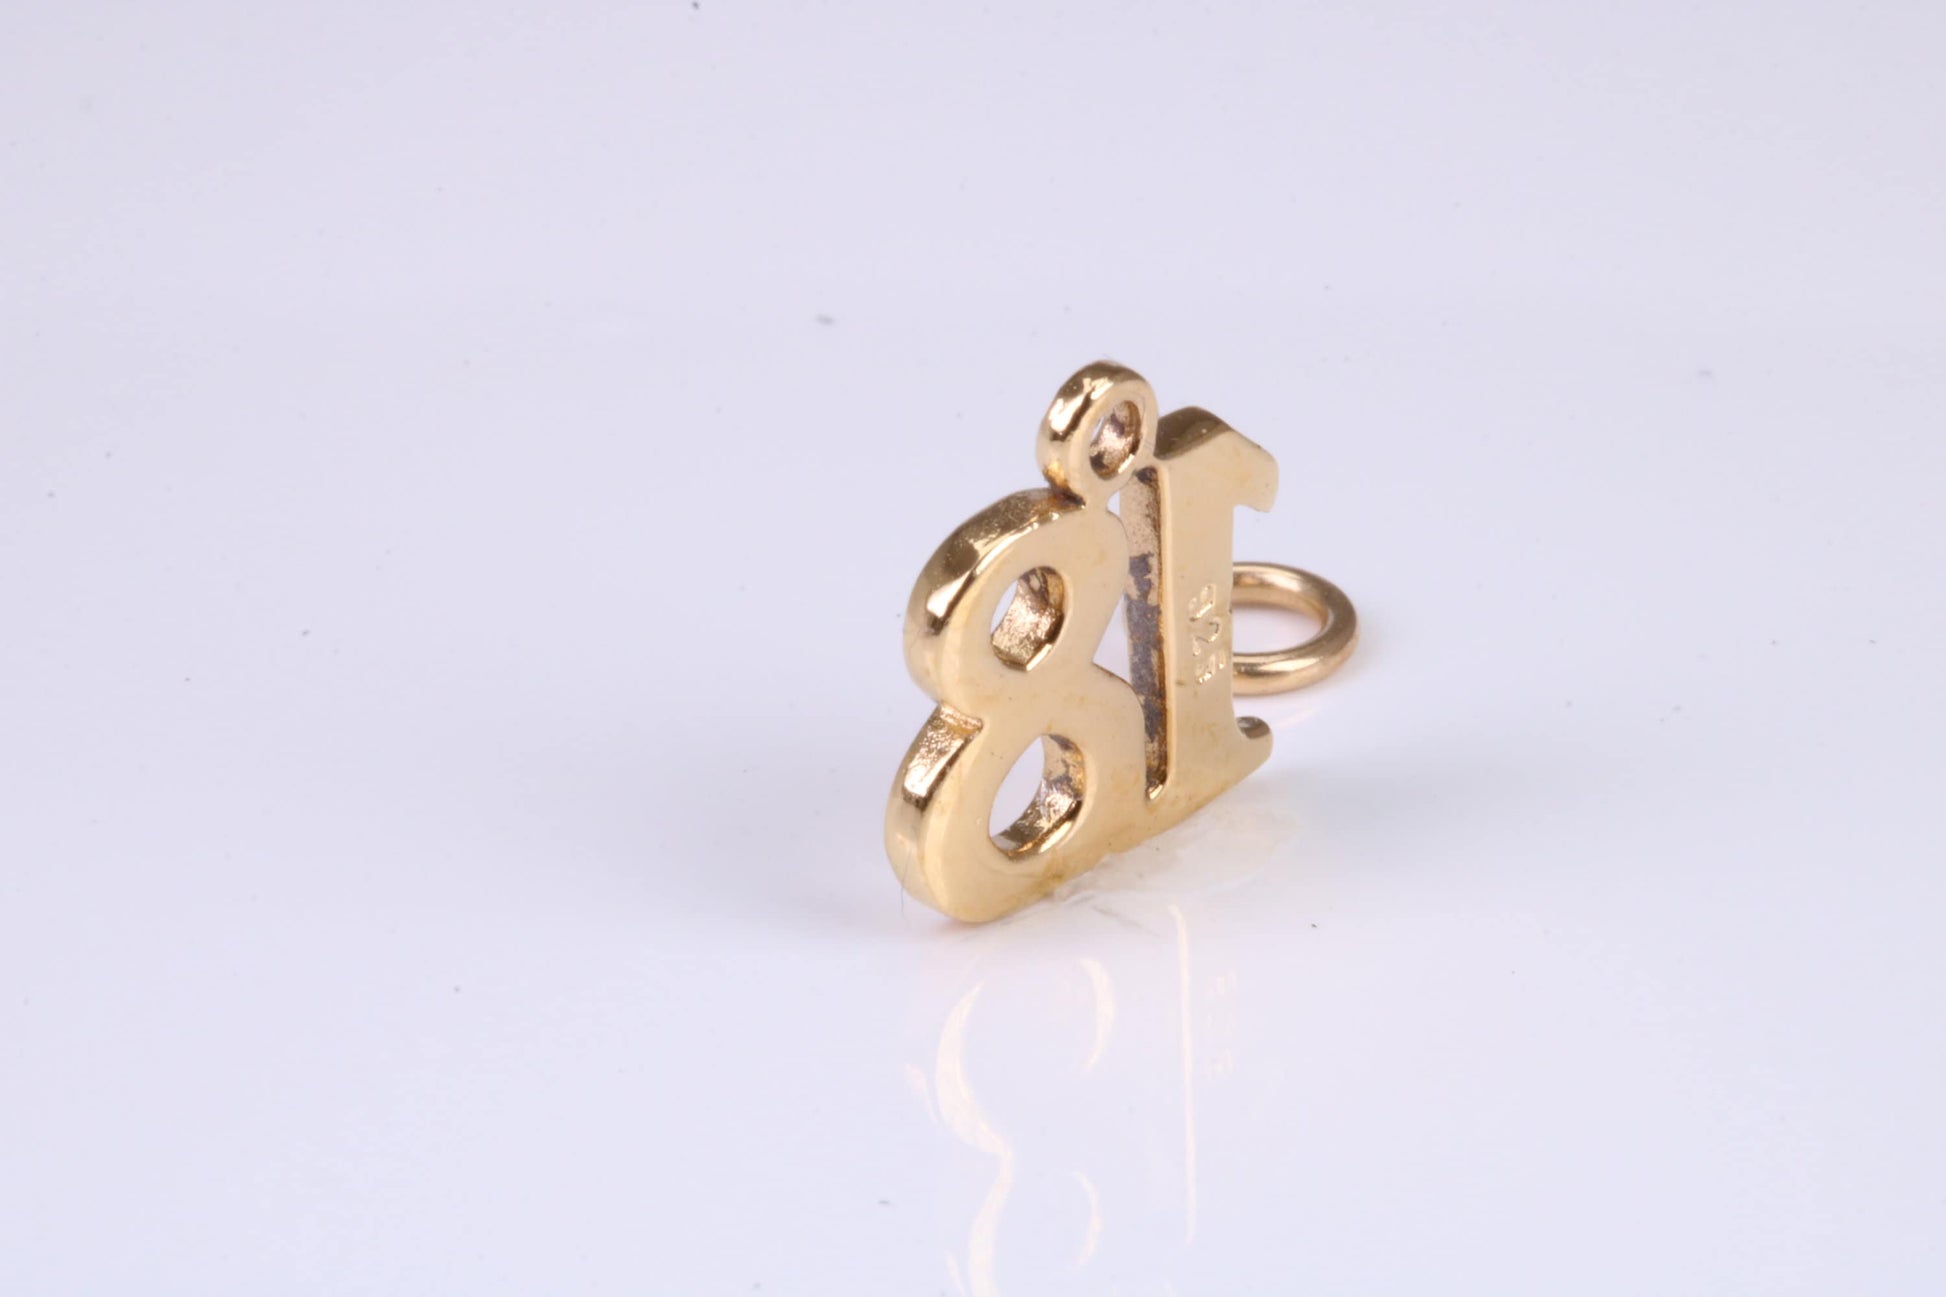 18th Birthday Charm, Traditional Charm, Made from Solid Yellow Gold, British Hallmarked, Complete with Attachment Link